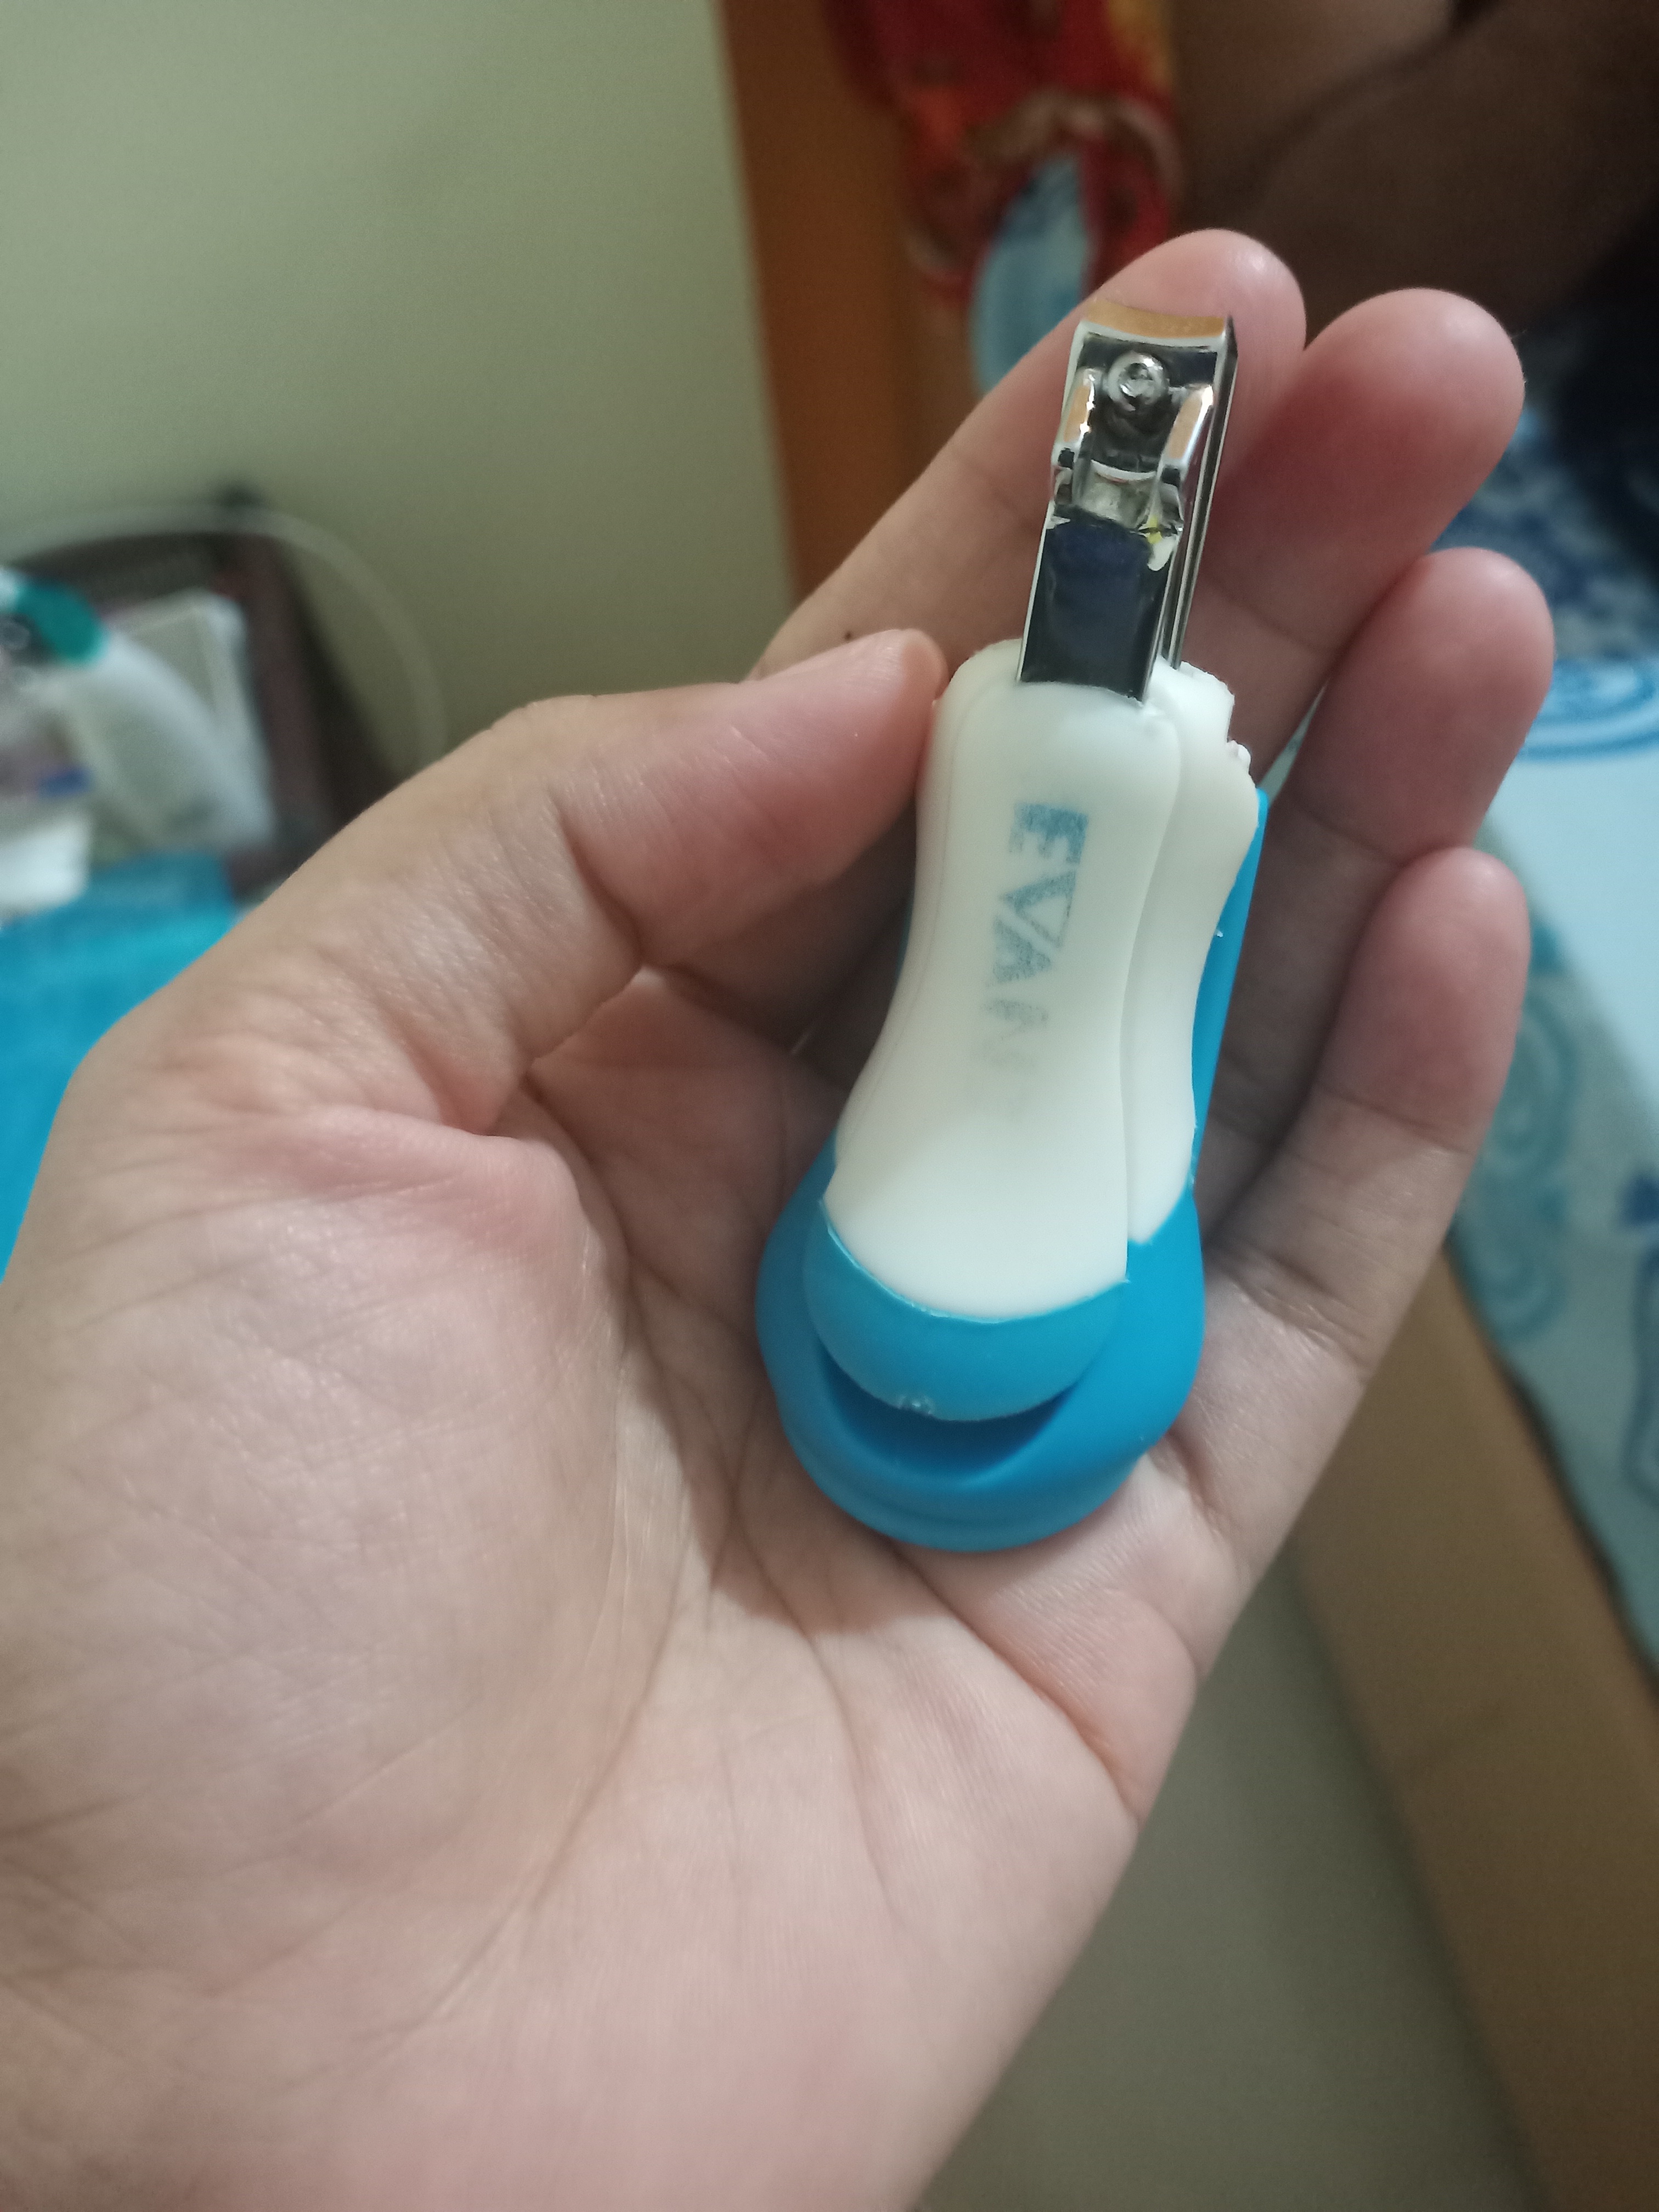 GOCART Baby  Nail Clippers with Magnifier-Safe and easy-By riankasarkar